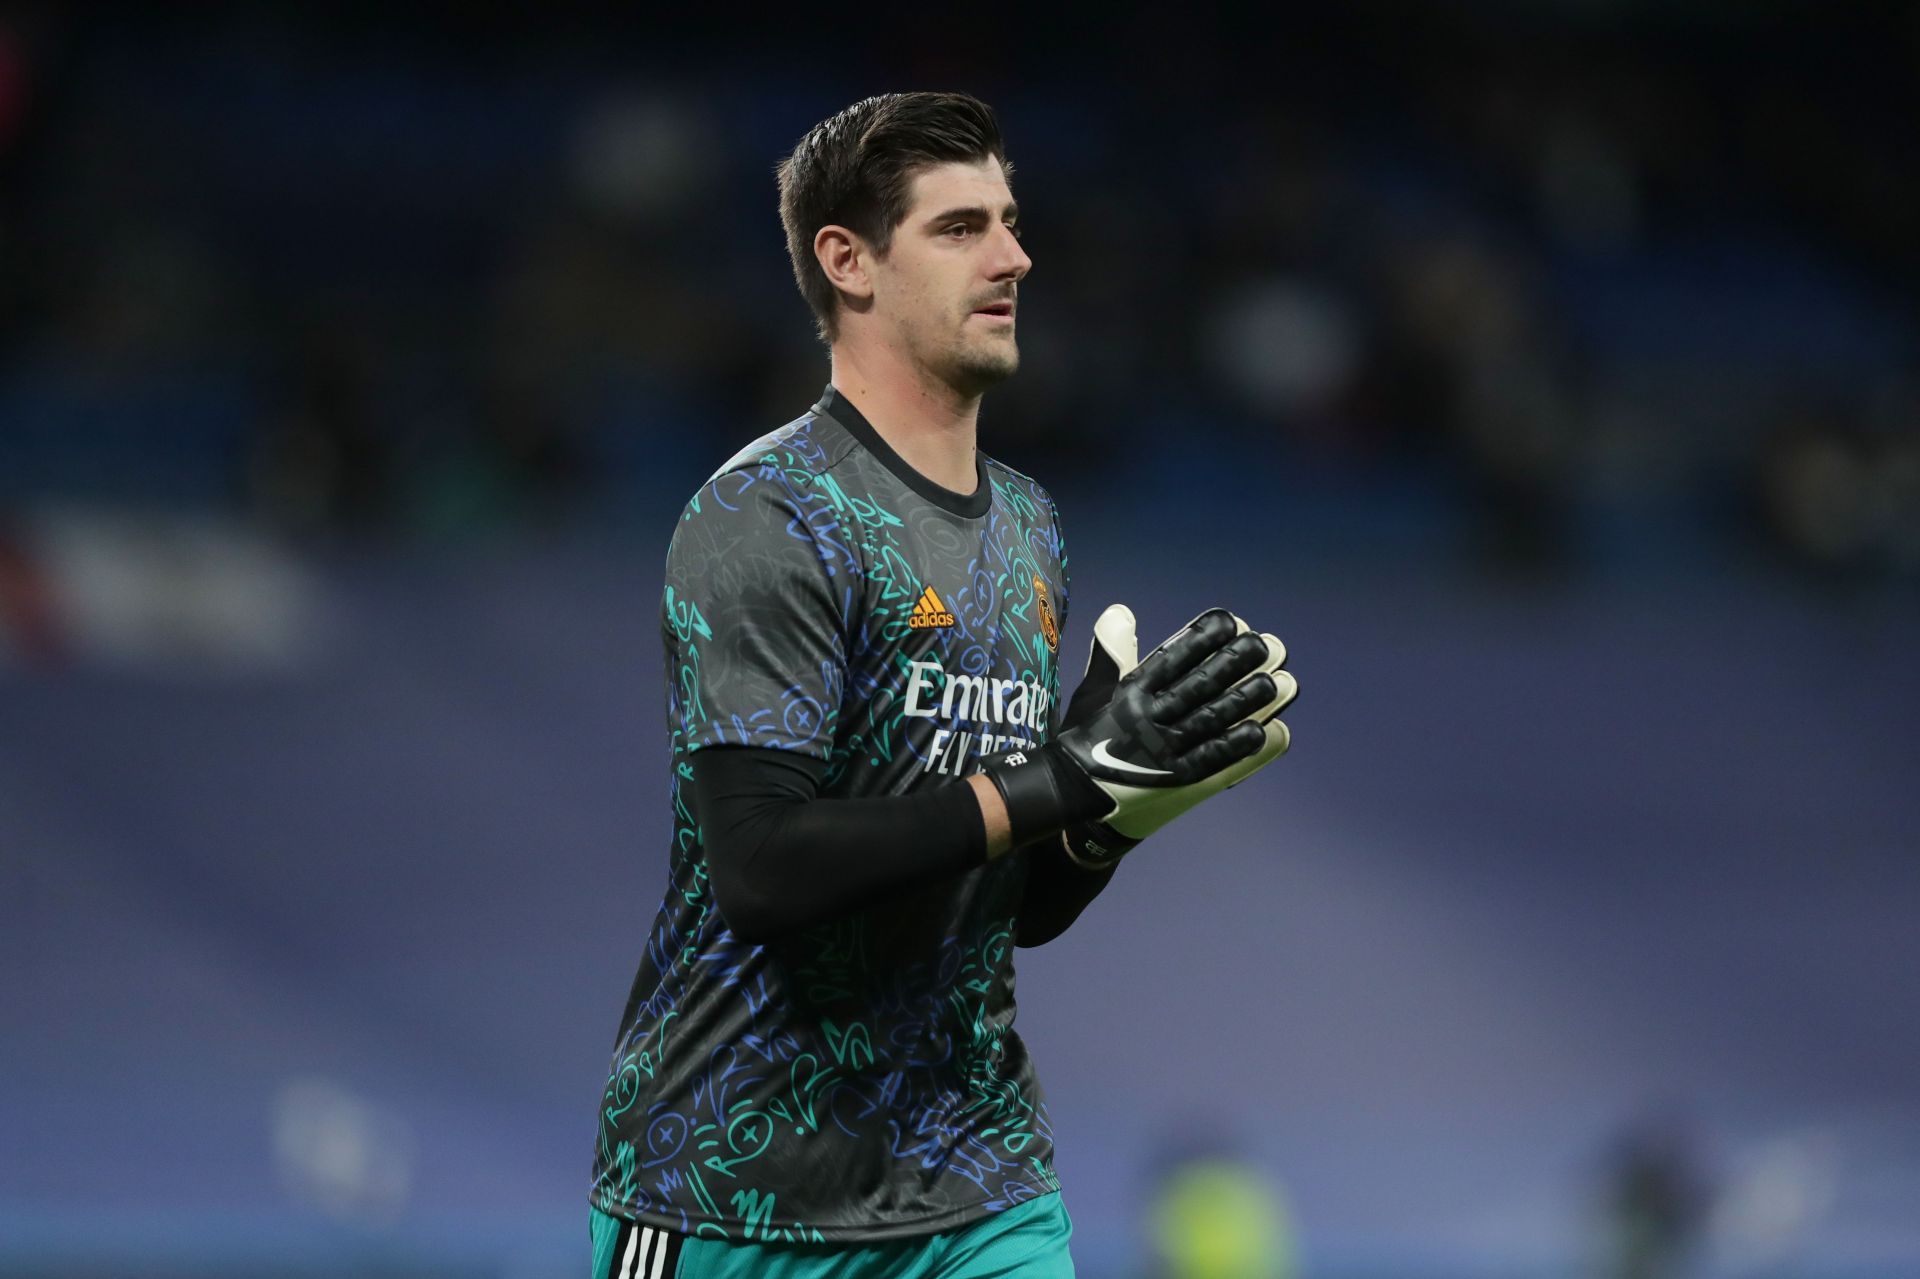 Courtois will once again have an important job